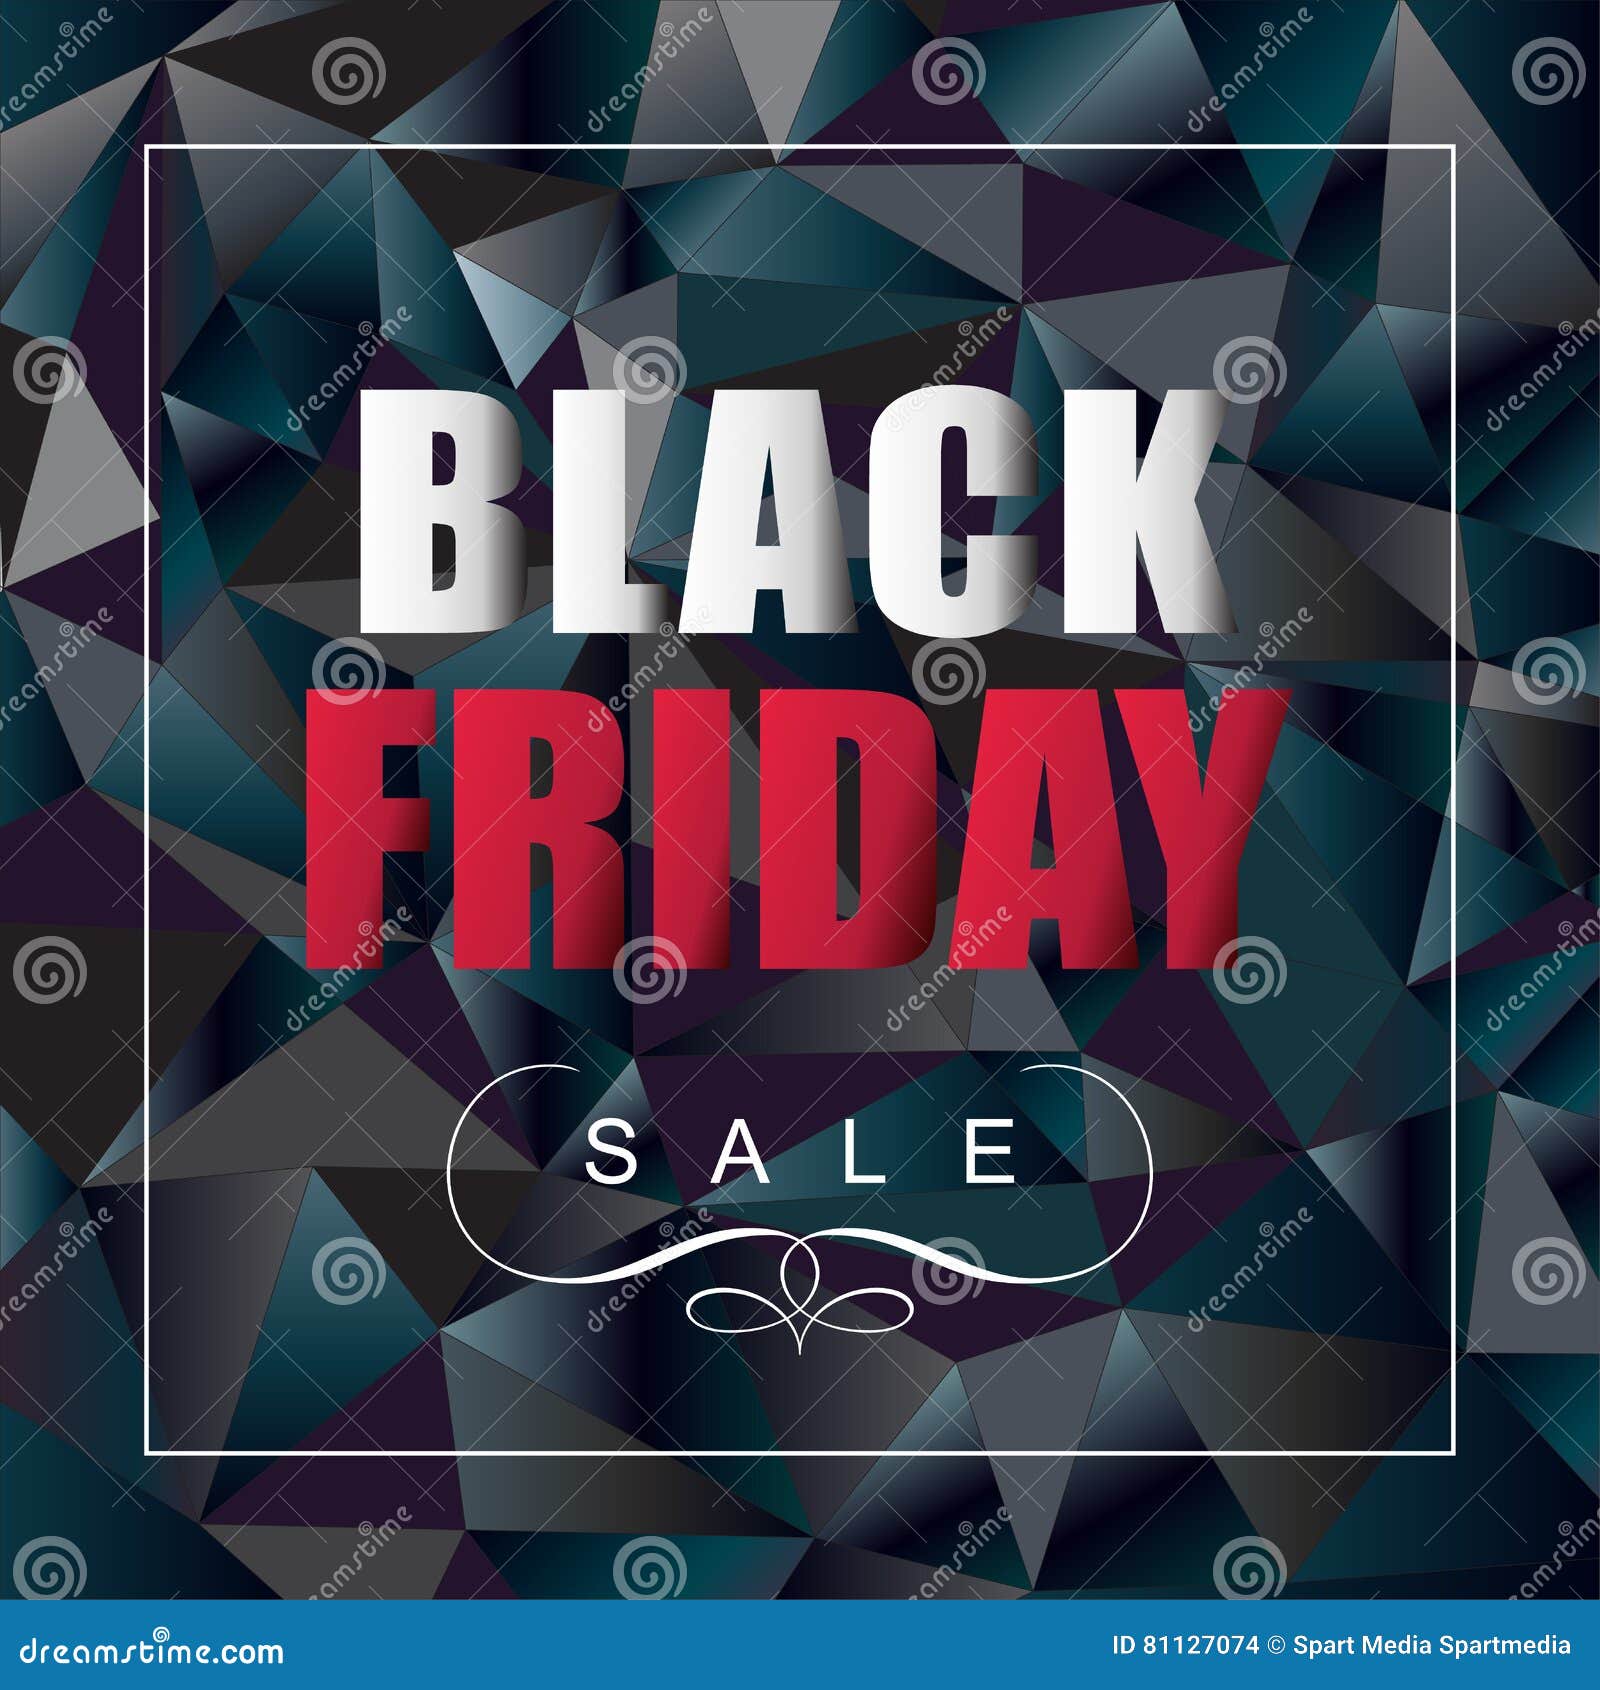 Black Friday Sale Discount Banner Geometric Abstract Modern Background